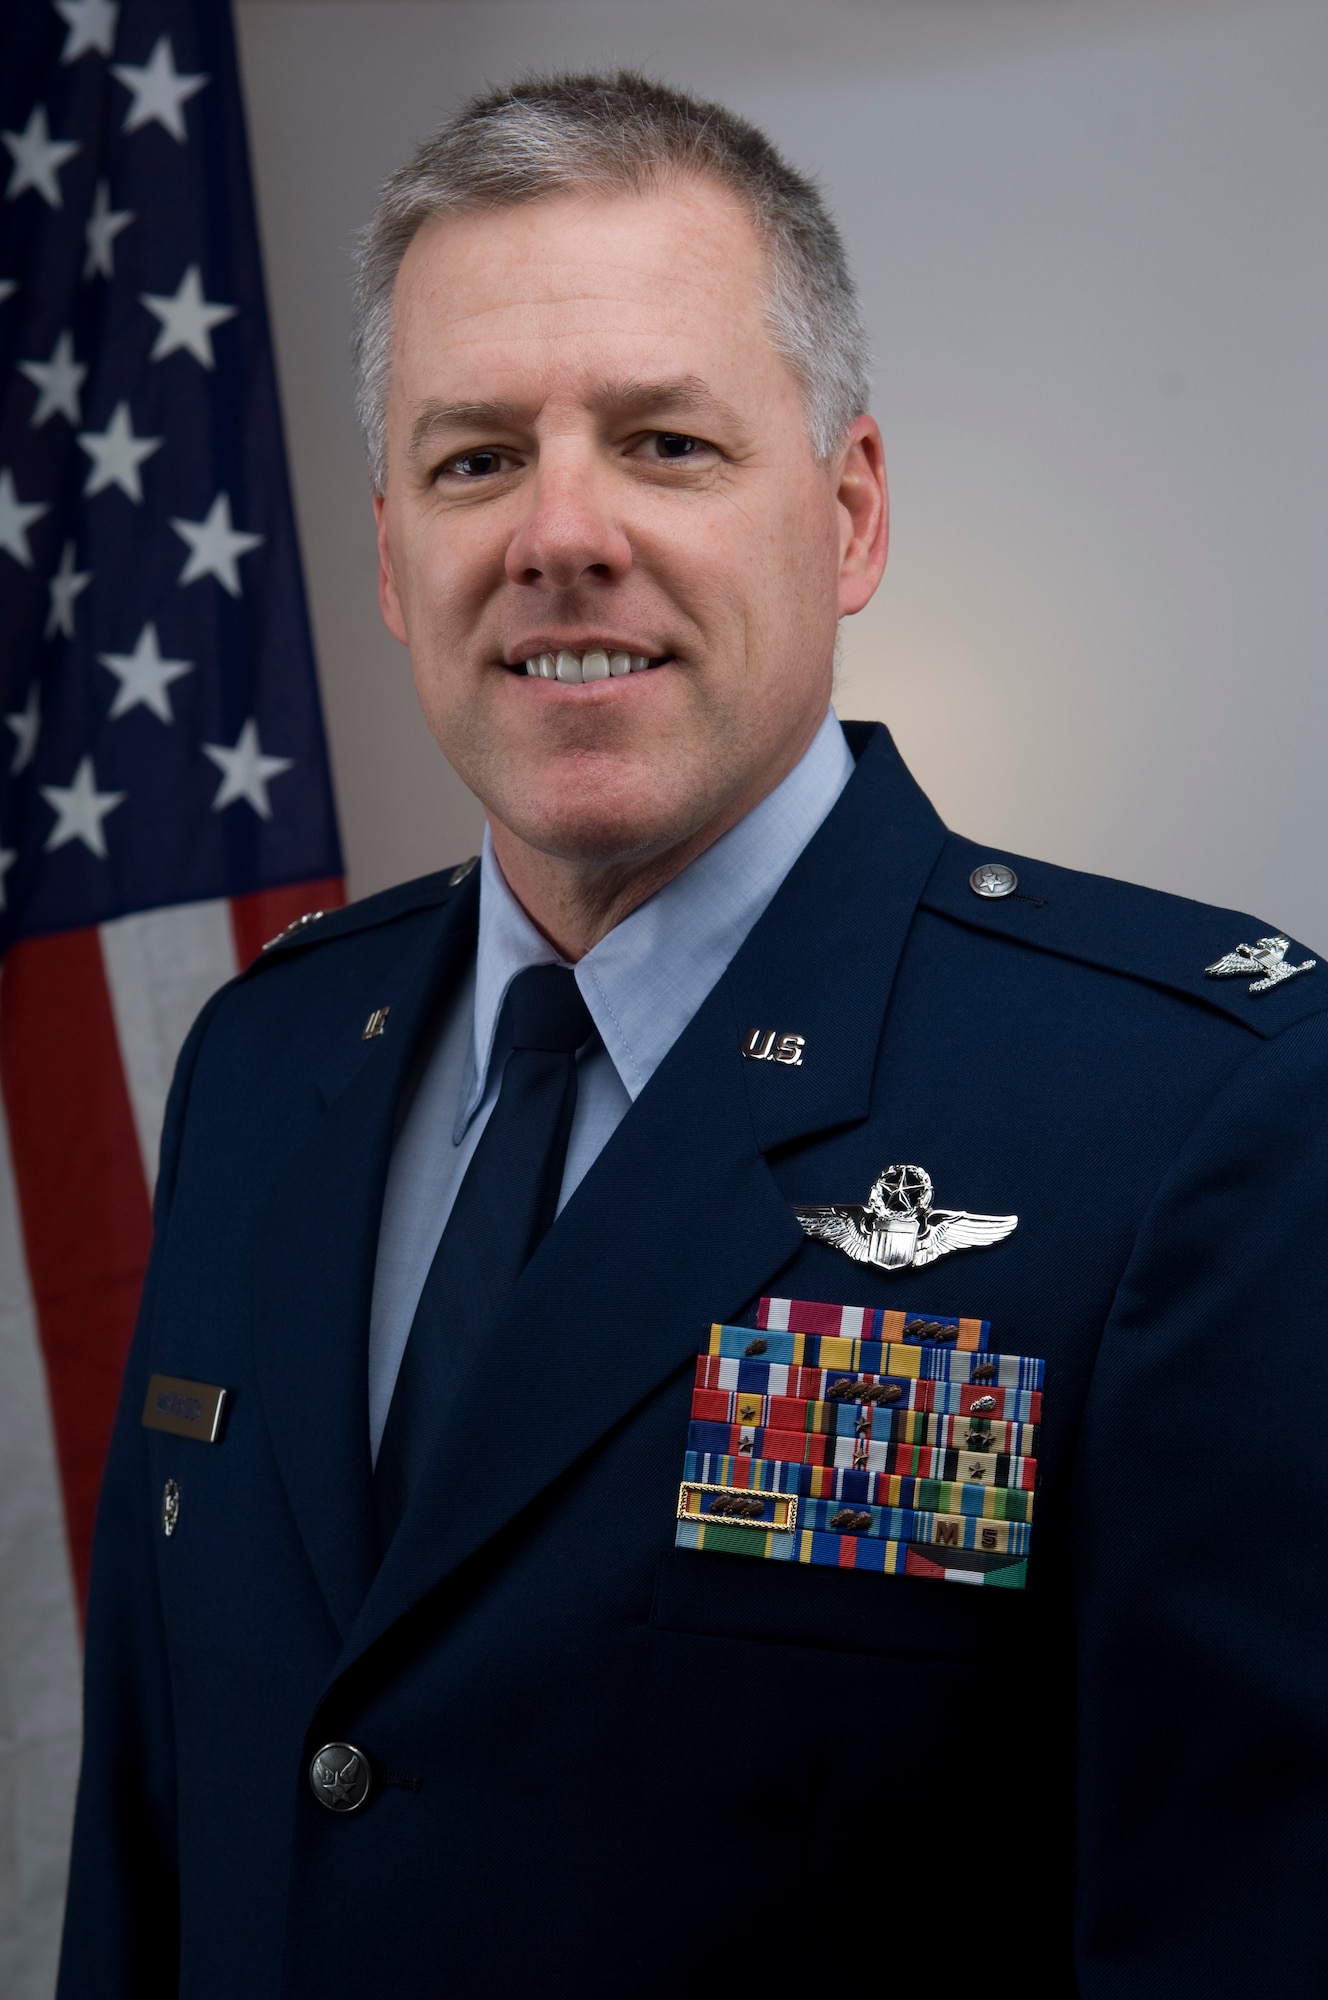 Col. Paul R. Wietbrock is the deputy commander of the 931st Air Refueling Group, McConnell Air Force Base, Kan.